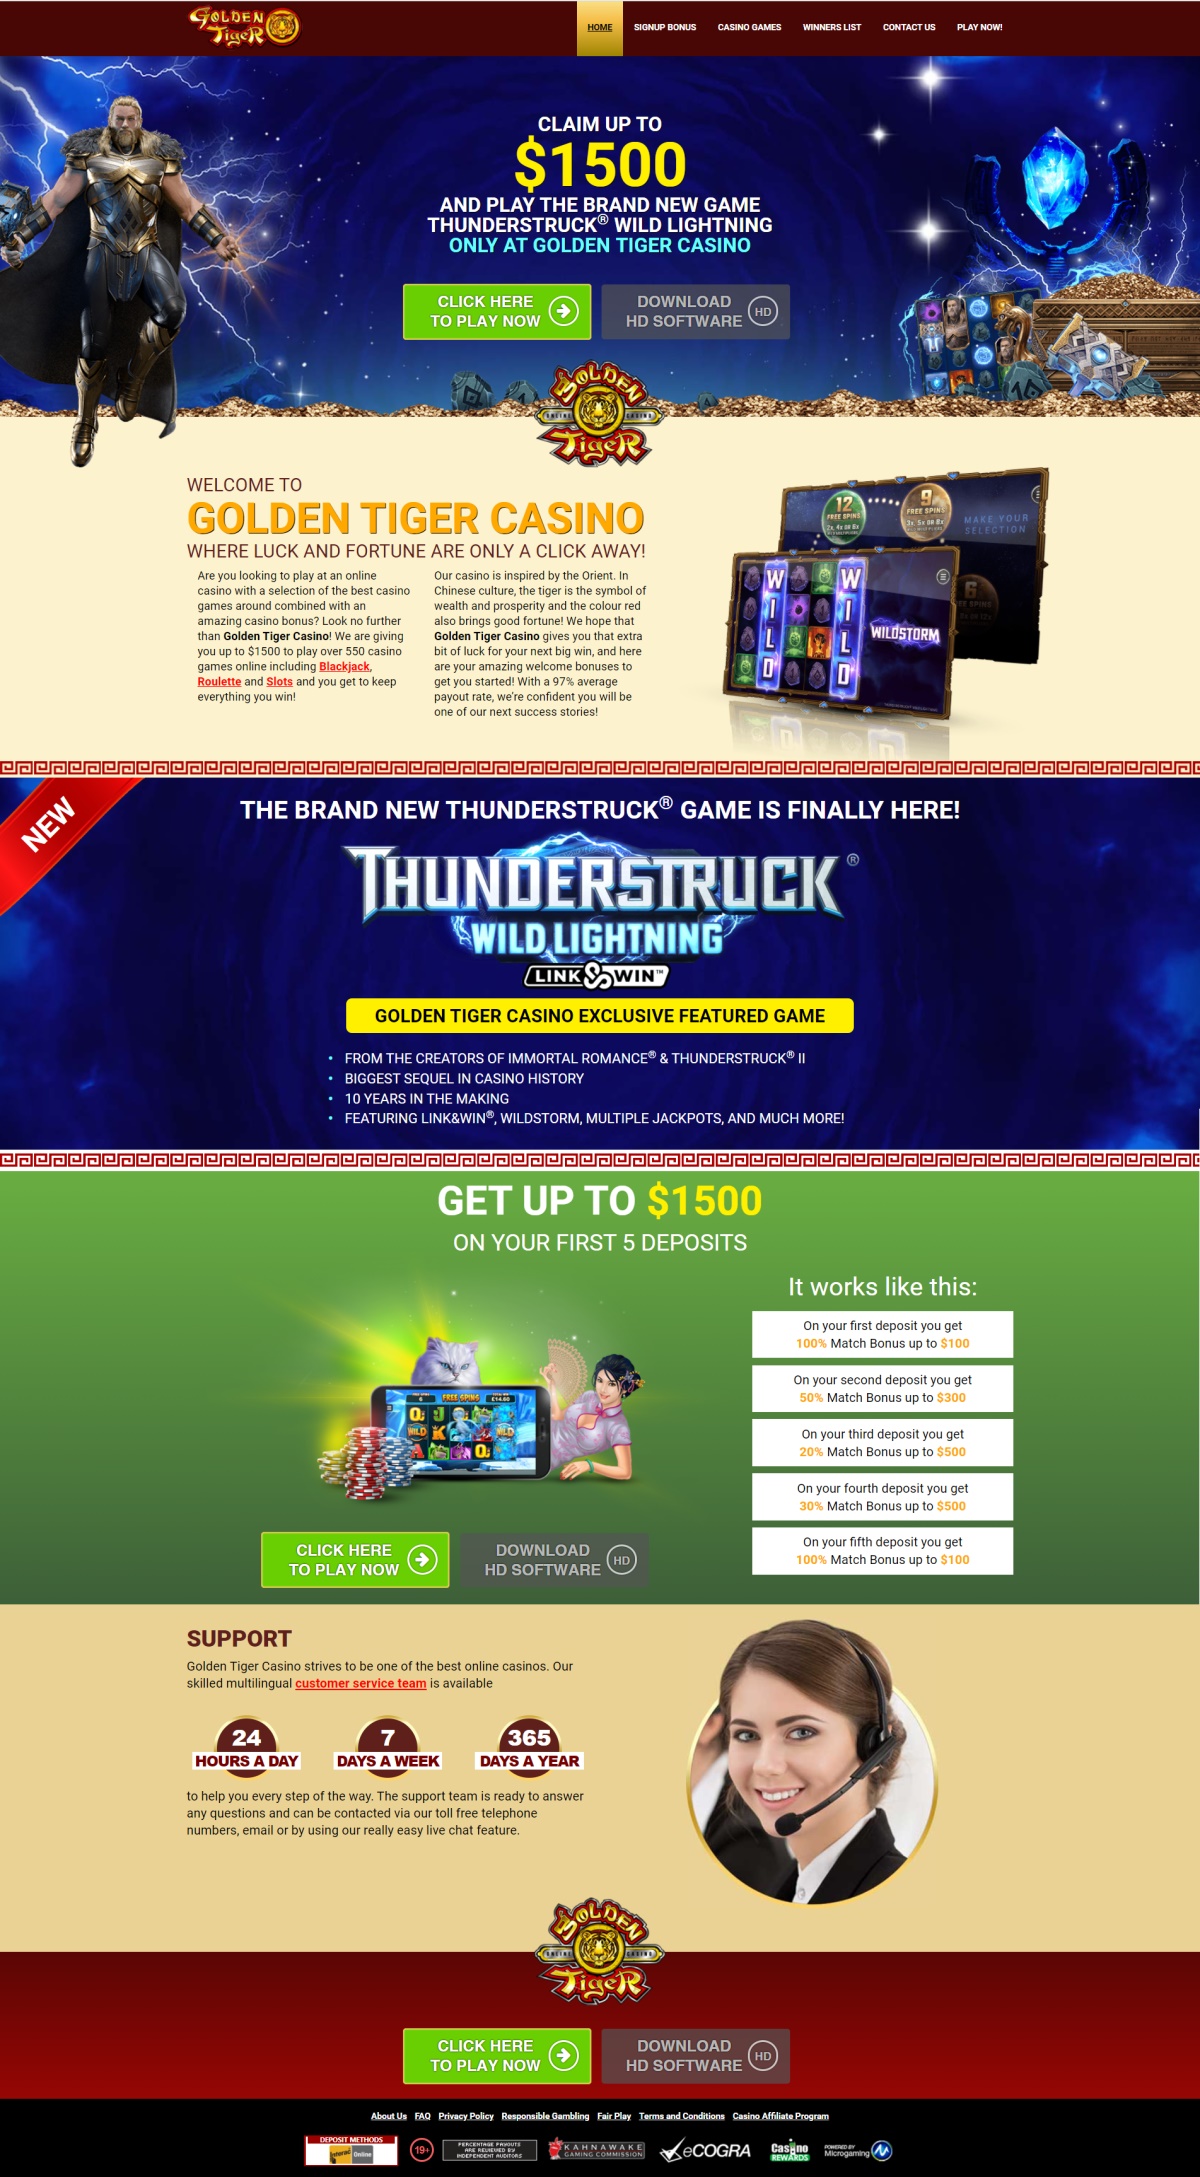 Are you looking to play at an online casino with a selection of the best casino games around combined with an amazing casino bonus? Look no further than Golden Tiger Casino! They are giving you up to $1500 to play over 550 casino games online including Blackjack, Roulette and Slots and you get to keep everything you win! Golden Tiger casino is inspired by the Orient. In Chinese culture, the tiger is the symbol of wealth and prosperity and the colour red also brings good fortune! We hope that Golden Tiger Casino gives you that extra bit of luck for your next big win, and here are your amazing welcome bonuses to get you started! With a 97% average payout rate, Golden Tiger are confident you will be one of their next success stories! The state-of-the-art gaming software at Golden Tiger Casino is 100% safe and secure so you can sit back, relax and enjoy the benefits of our amazing jackpots! Enjoy the most realistic graphics and exciting sound effects with impeccably smooth gameplay to enhance your experience! Golden Tiger Casino was launched over 15 years ago and since then they have won numerous awards including Best New Online Casino, Best Casino Service, and more recently Best Microgaming Online Casino of the Year. Golden Tiger Casino pride theirselves on providing first class entertainment and the widest selection of more than 550 online casino games available anywhere on the internet. Golden Tiger Casino skilled multilingual customer service team is available 24hours a day, 7days a week and 365days a year to help you every step of the way. The support team is ready to answer any questions and can be contacted via Golden Tiger Casino toll free telephone numbers, email or by using their really easy live chat feature.